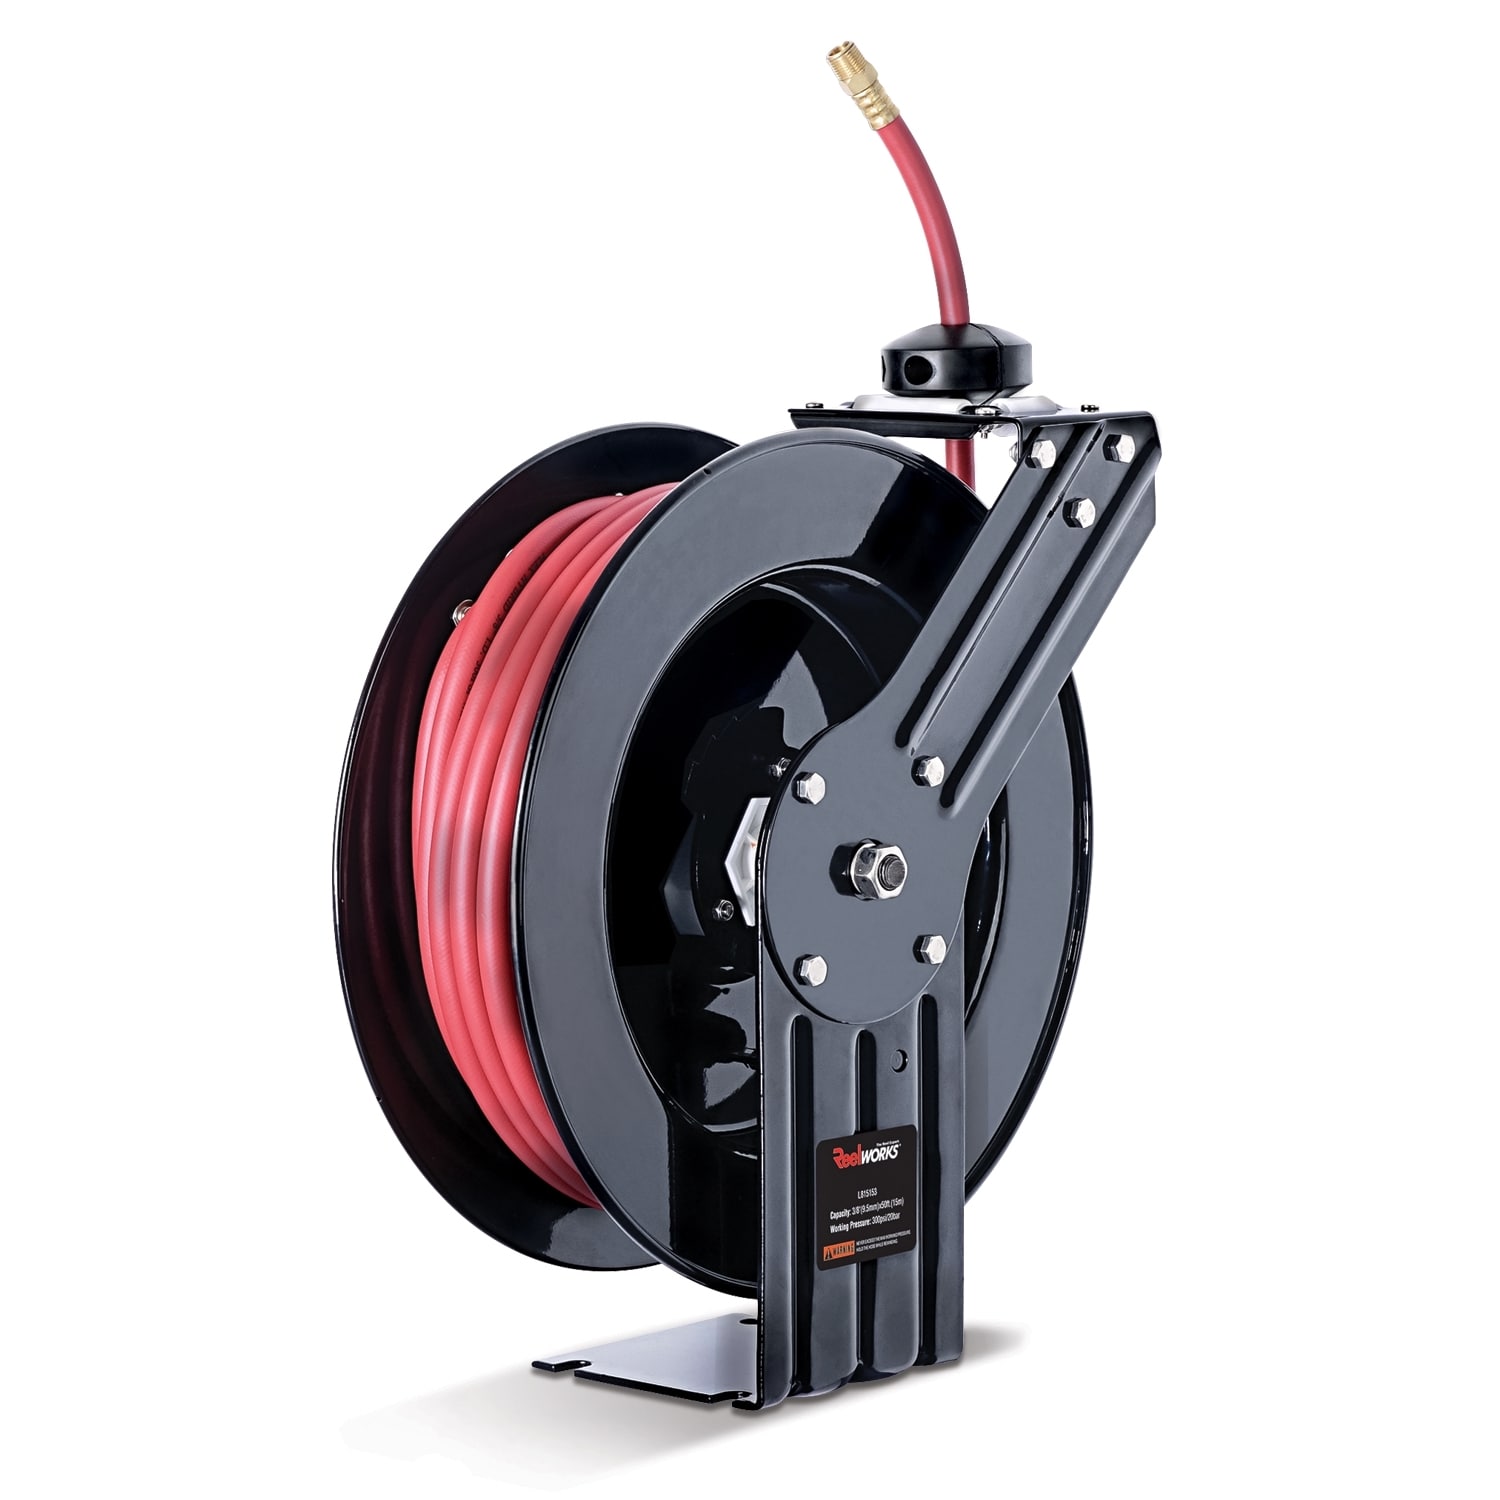 ReelWorks Industrial Retractable Grease Hose Reel - 1/4 x 50'FT, 1/4 MNPT Connections, Single Arm